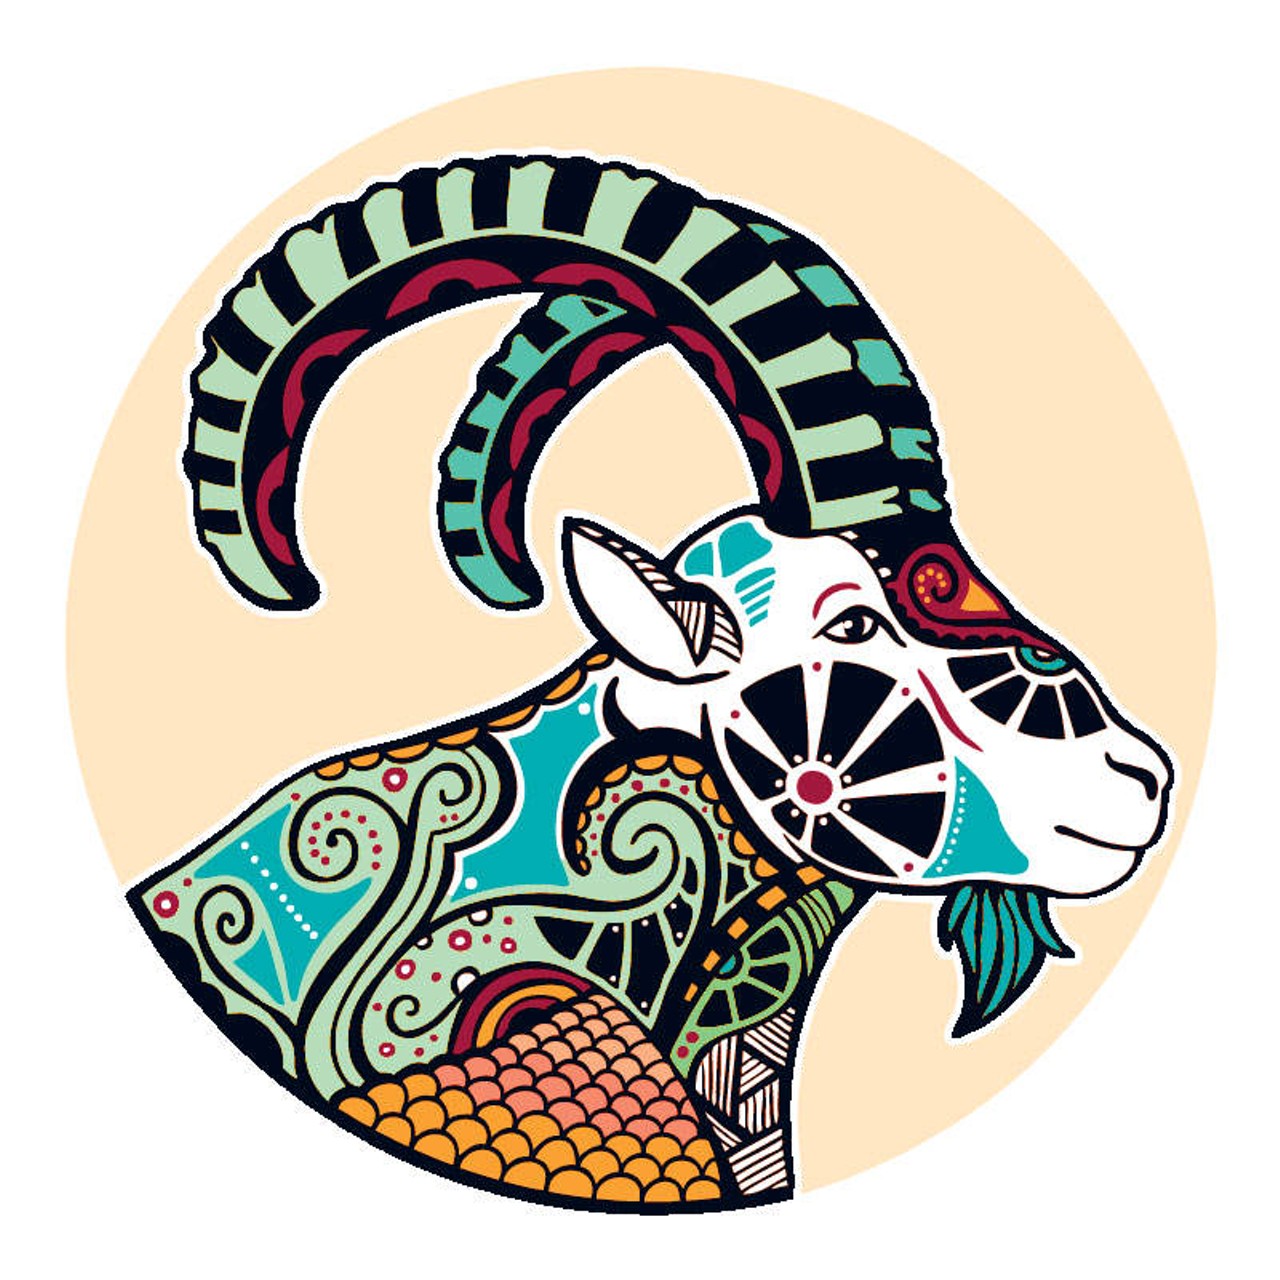 CAPRICORN (Dec. 21-Jan. 20): 
You&#146;ve been juggling so many variables, no wonder you&#146;re feeling a little schizophrenic. Flipping back and forth between this and that, it becomes difficult to find yourself when life settles down at the end of the day. You don&#146;t necessarily need a vacation because you thrive more on work than you do on play. But you definitely need to chill out because the bigger part of you is spiritually exhausted from burning the candle at both ends. Something needs to change. You could get the ball rolling by tuning in to whatever it takes to feel centered and whole again.